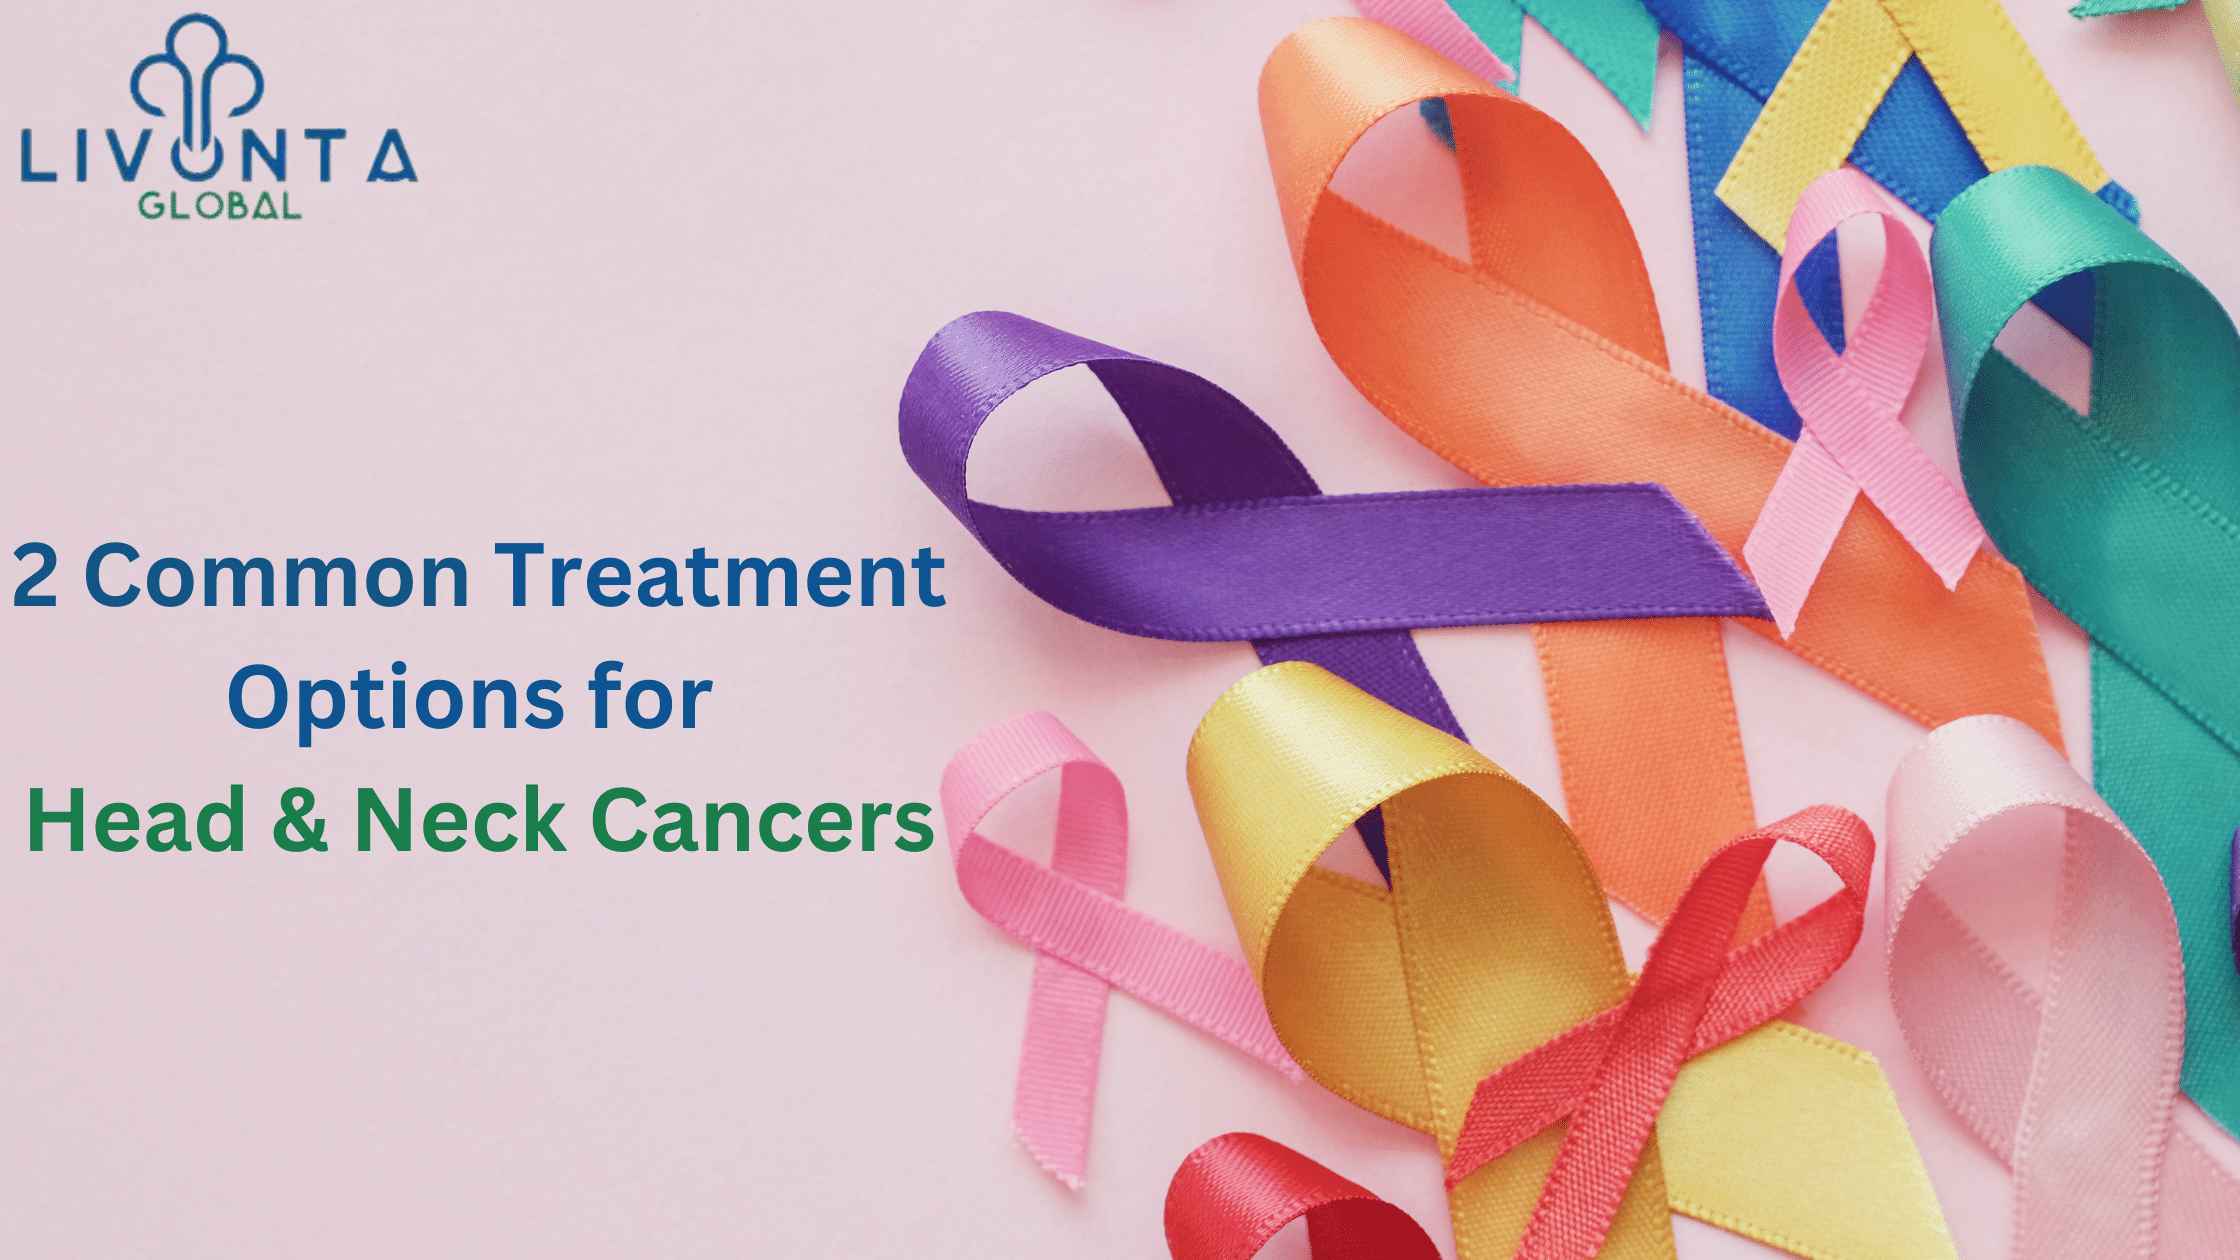 2 Common Treatment Options for Head & Neck Cancers